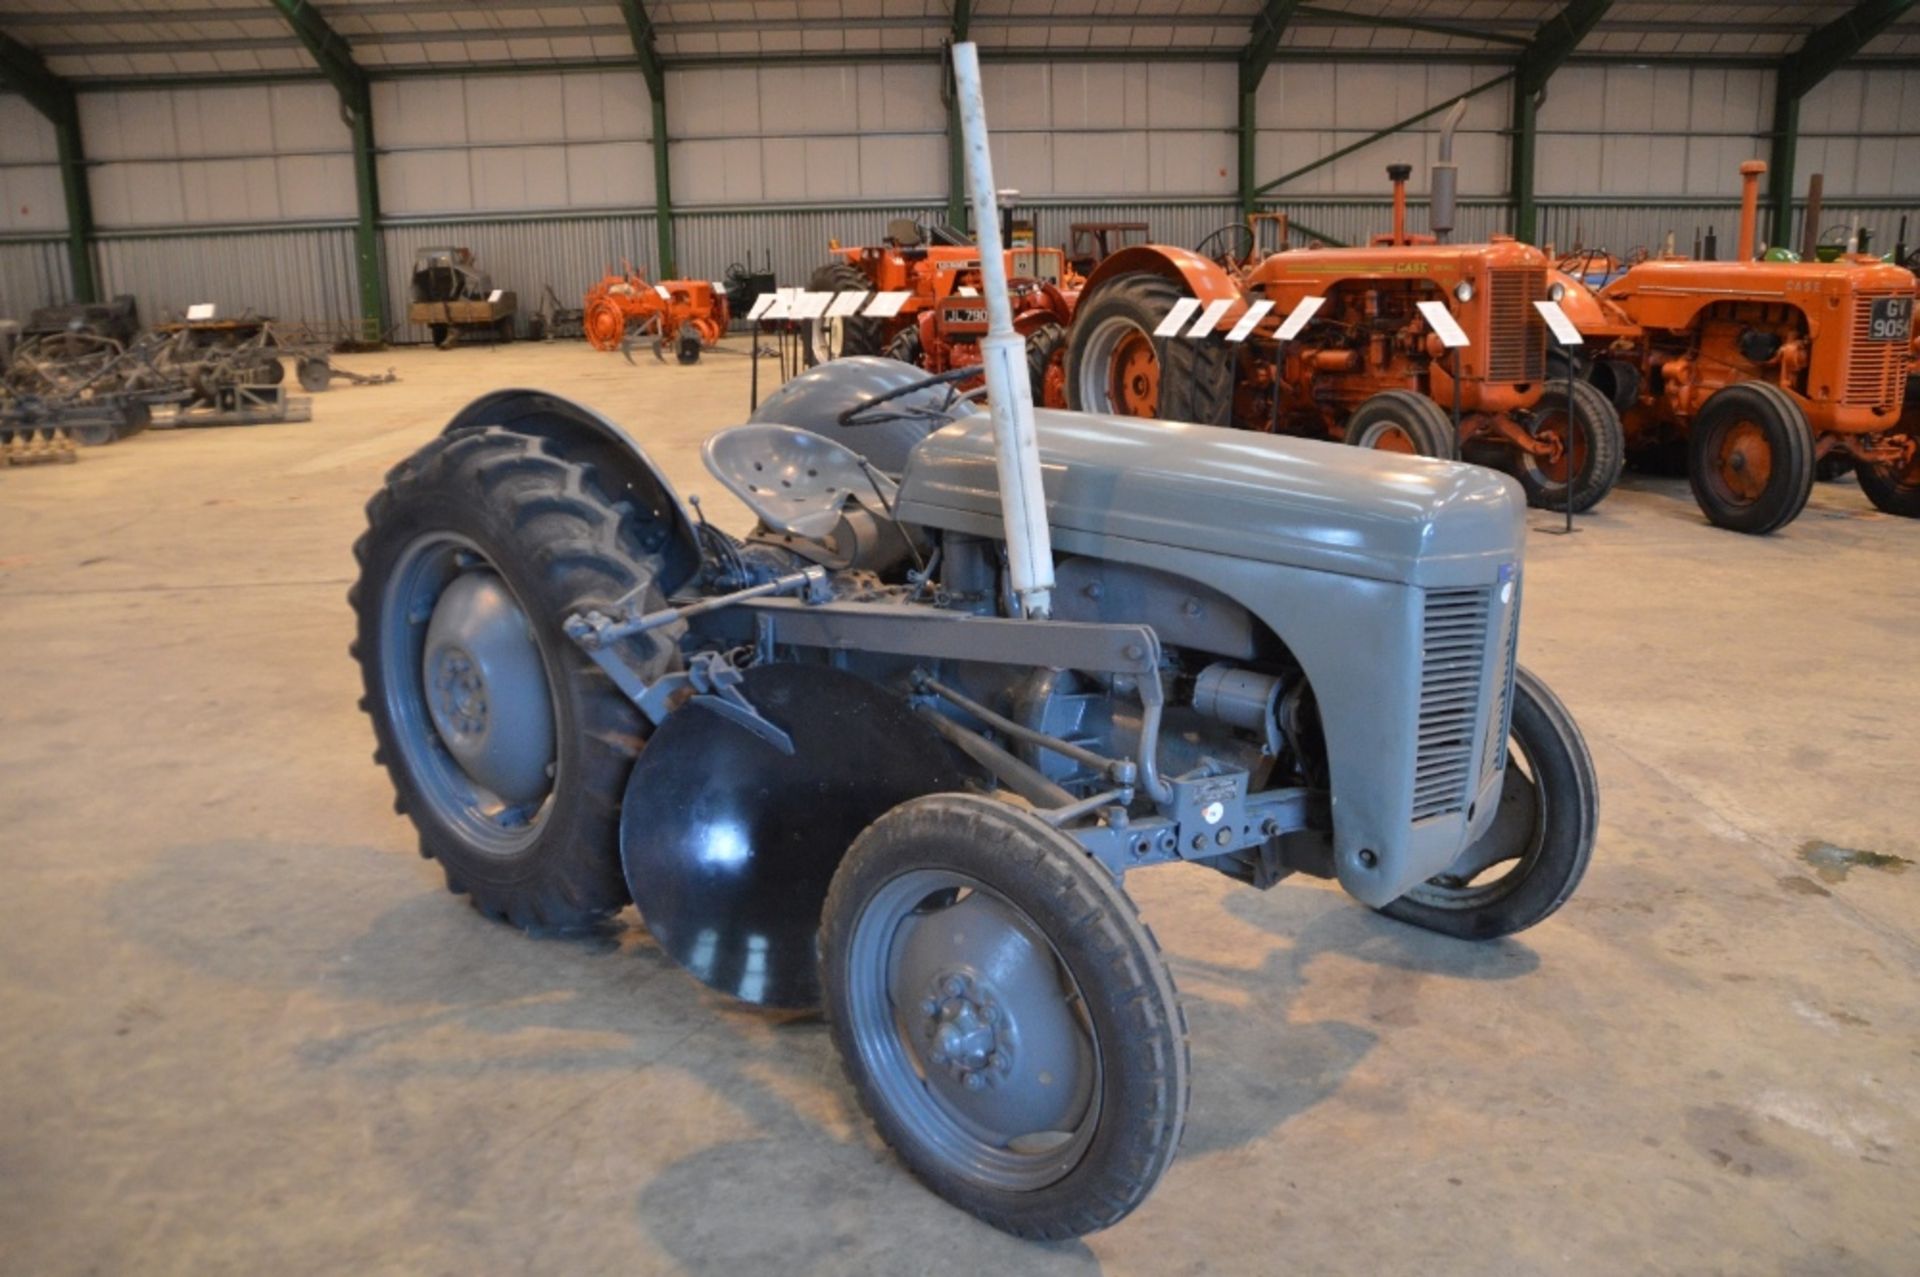 1950 FERGUSON TE-D20 4cylinder petrol/paraffin TRACTOR Reg No: 472 XUA Serial No: TED141665 Fitted - Image 4 of 4